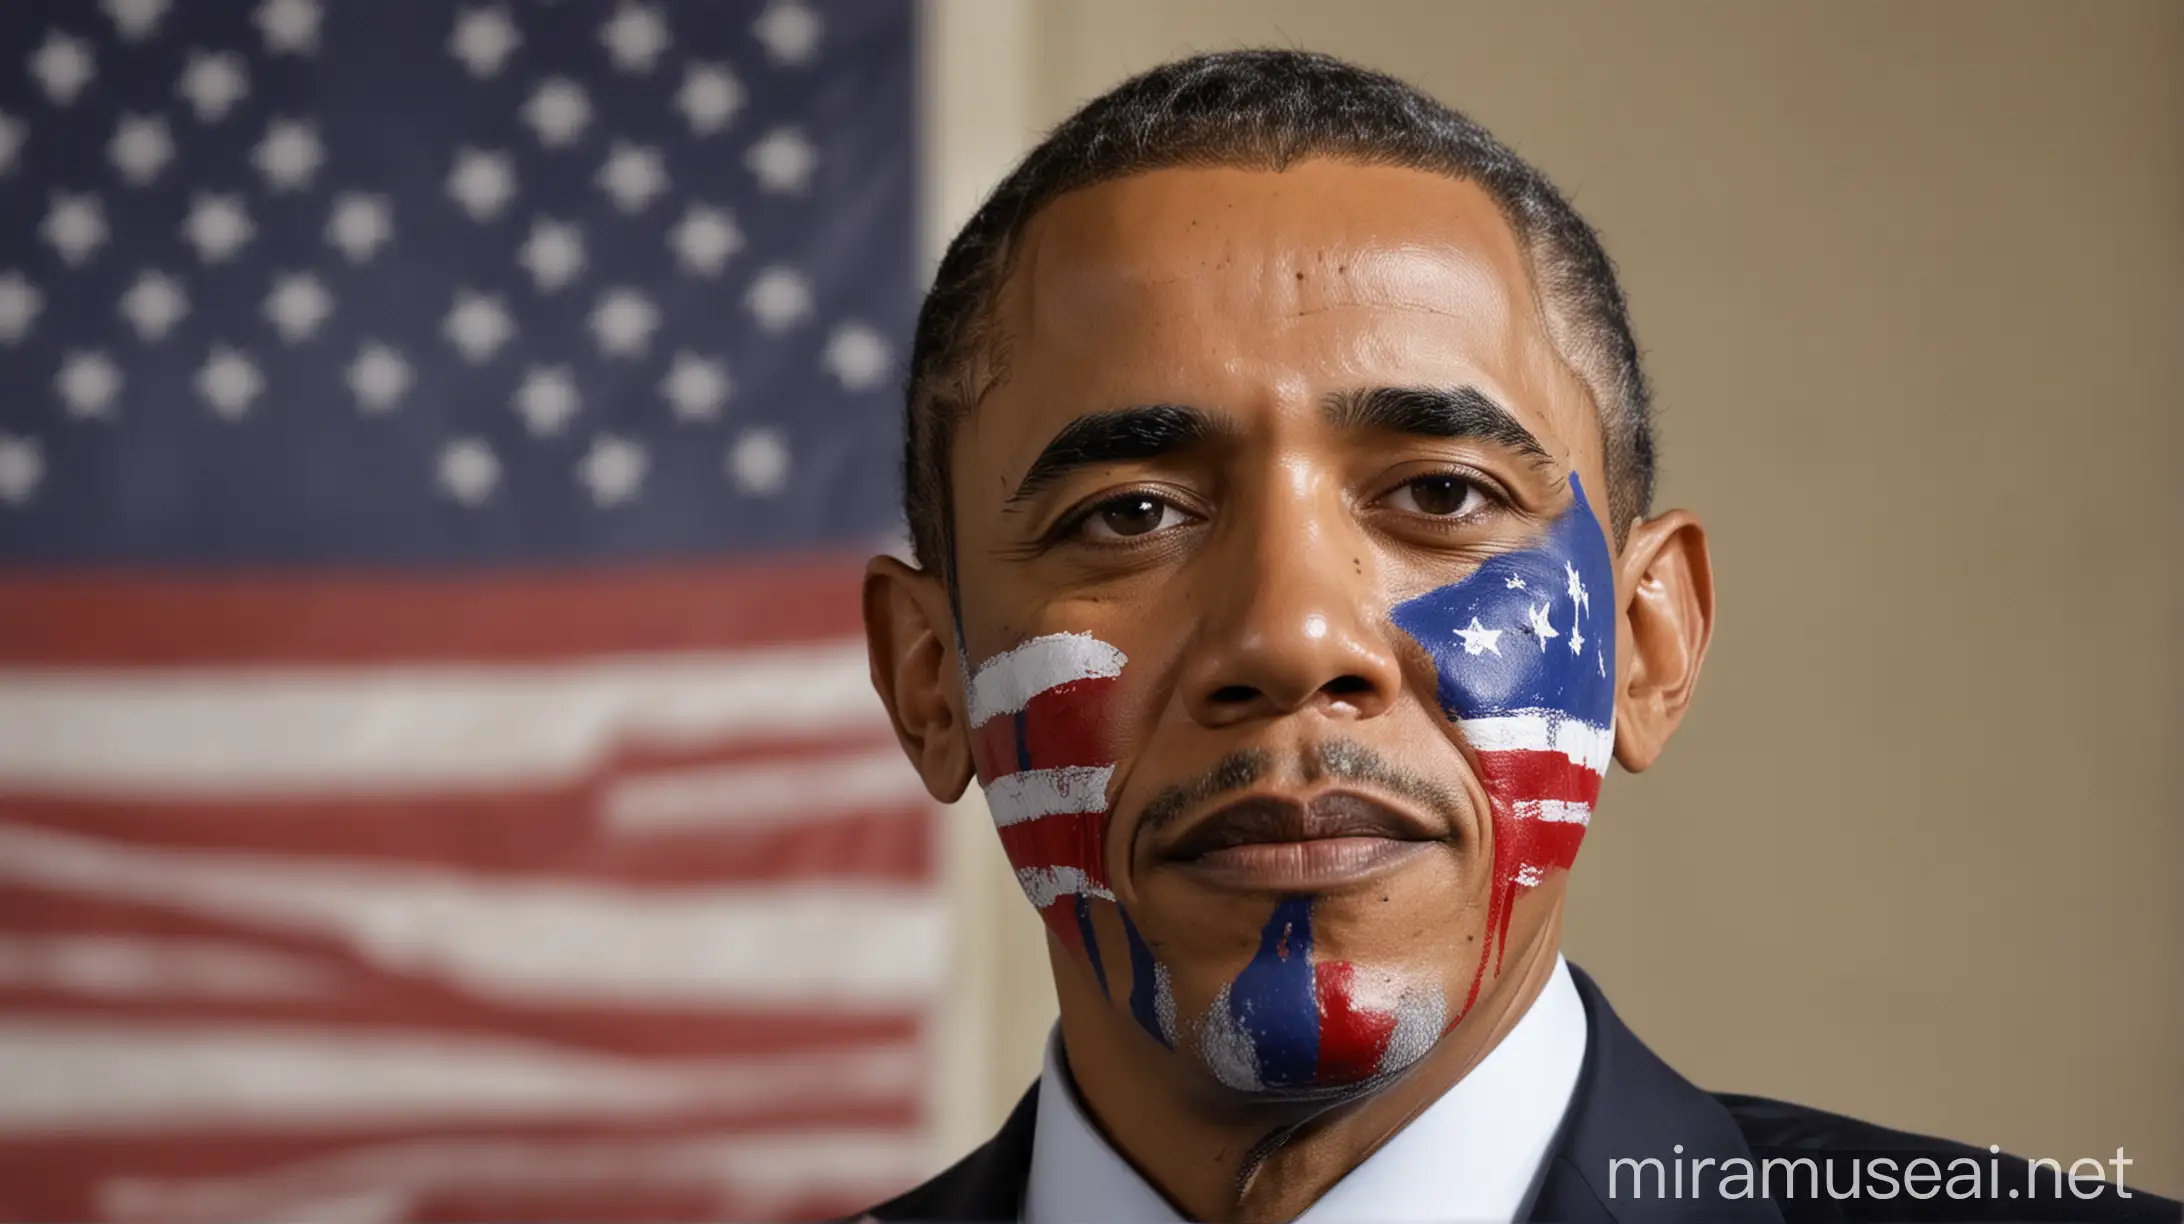 Barack Obama with American Flag Face Paint